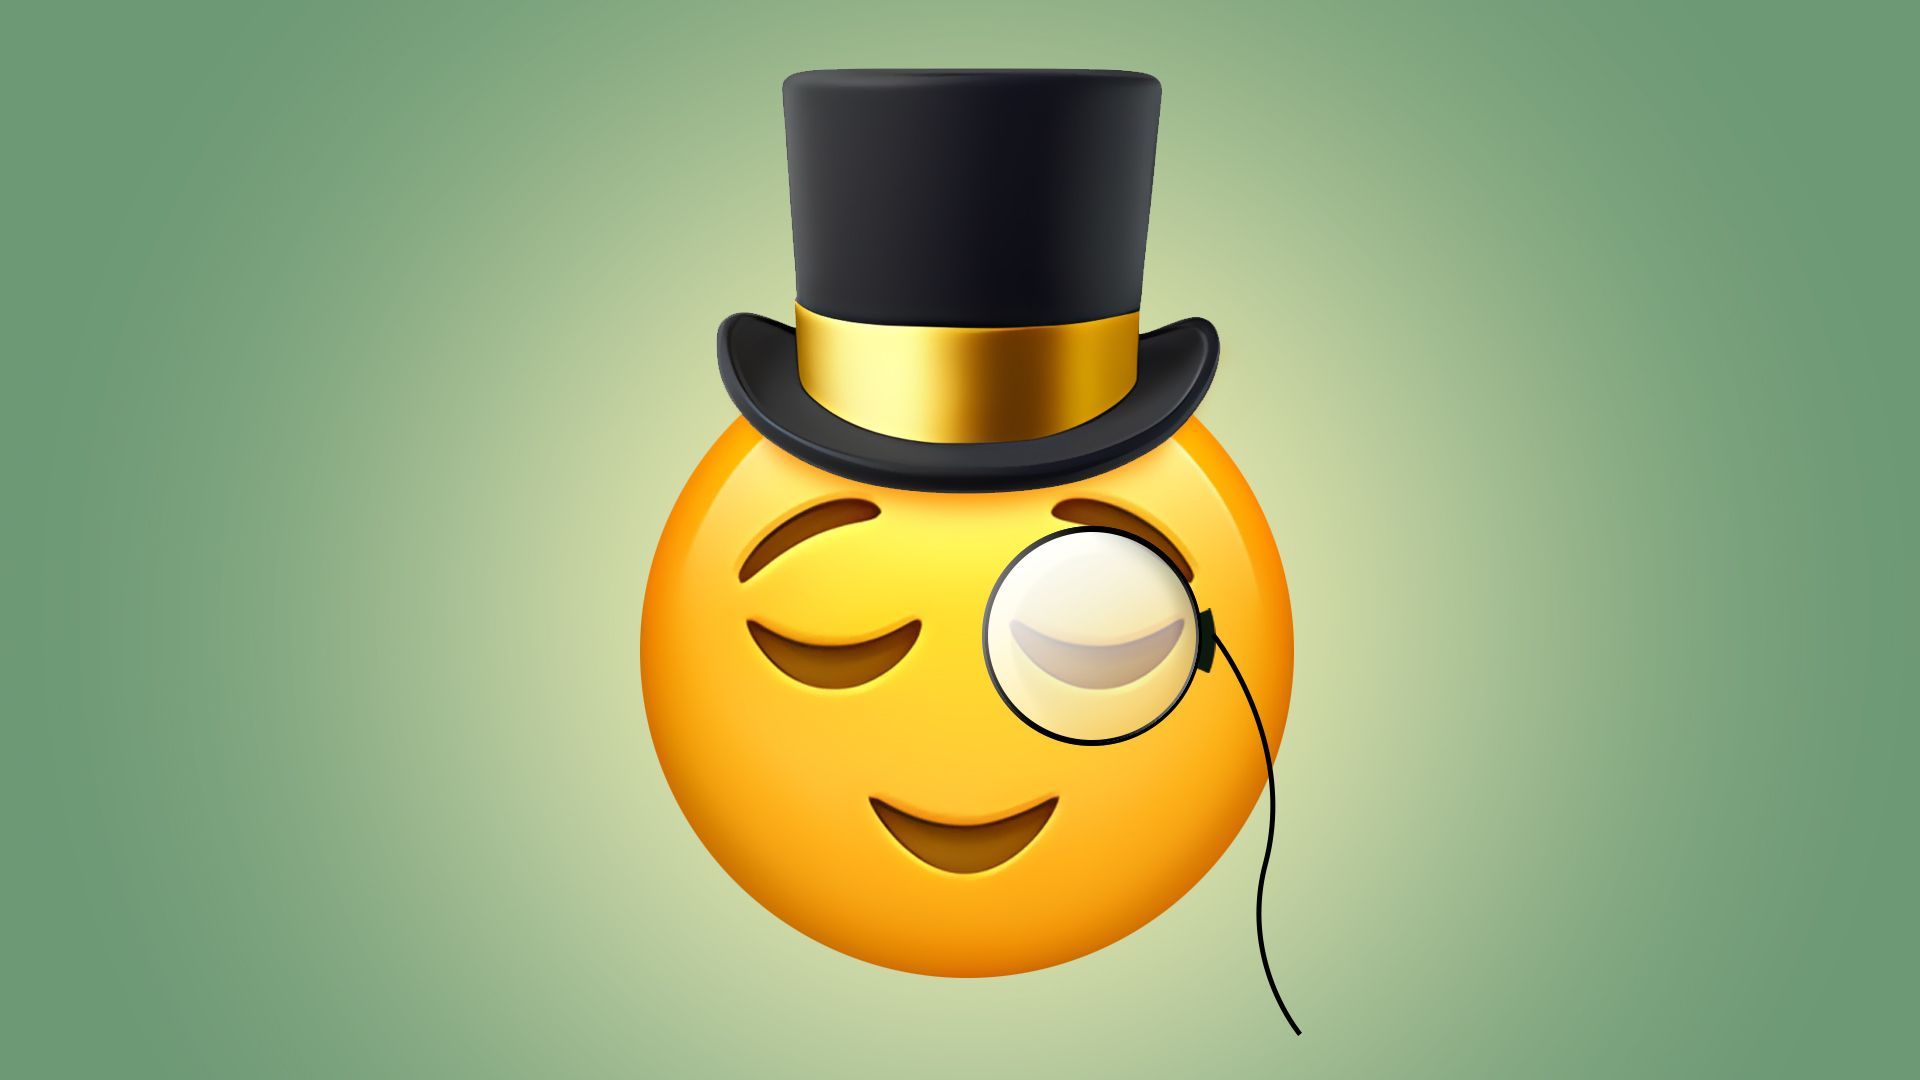 Illustration of a relaxed emoji with a monocle and top hat